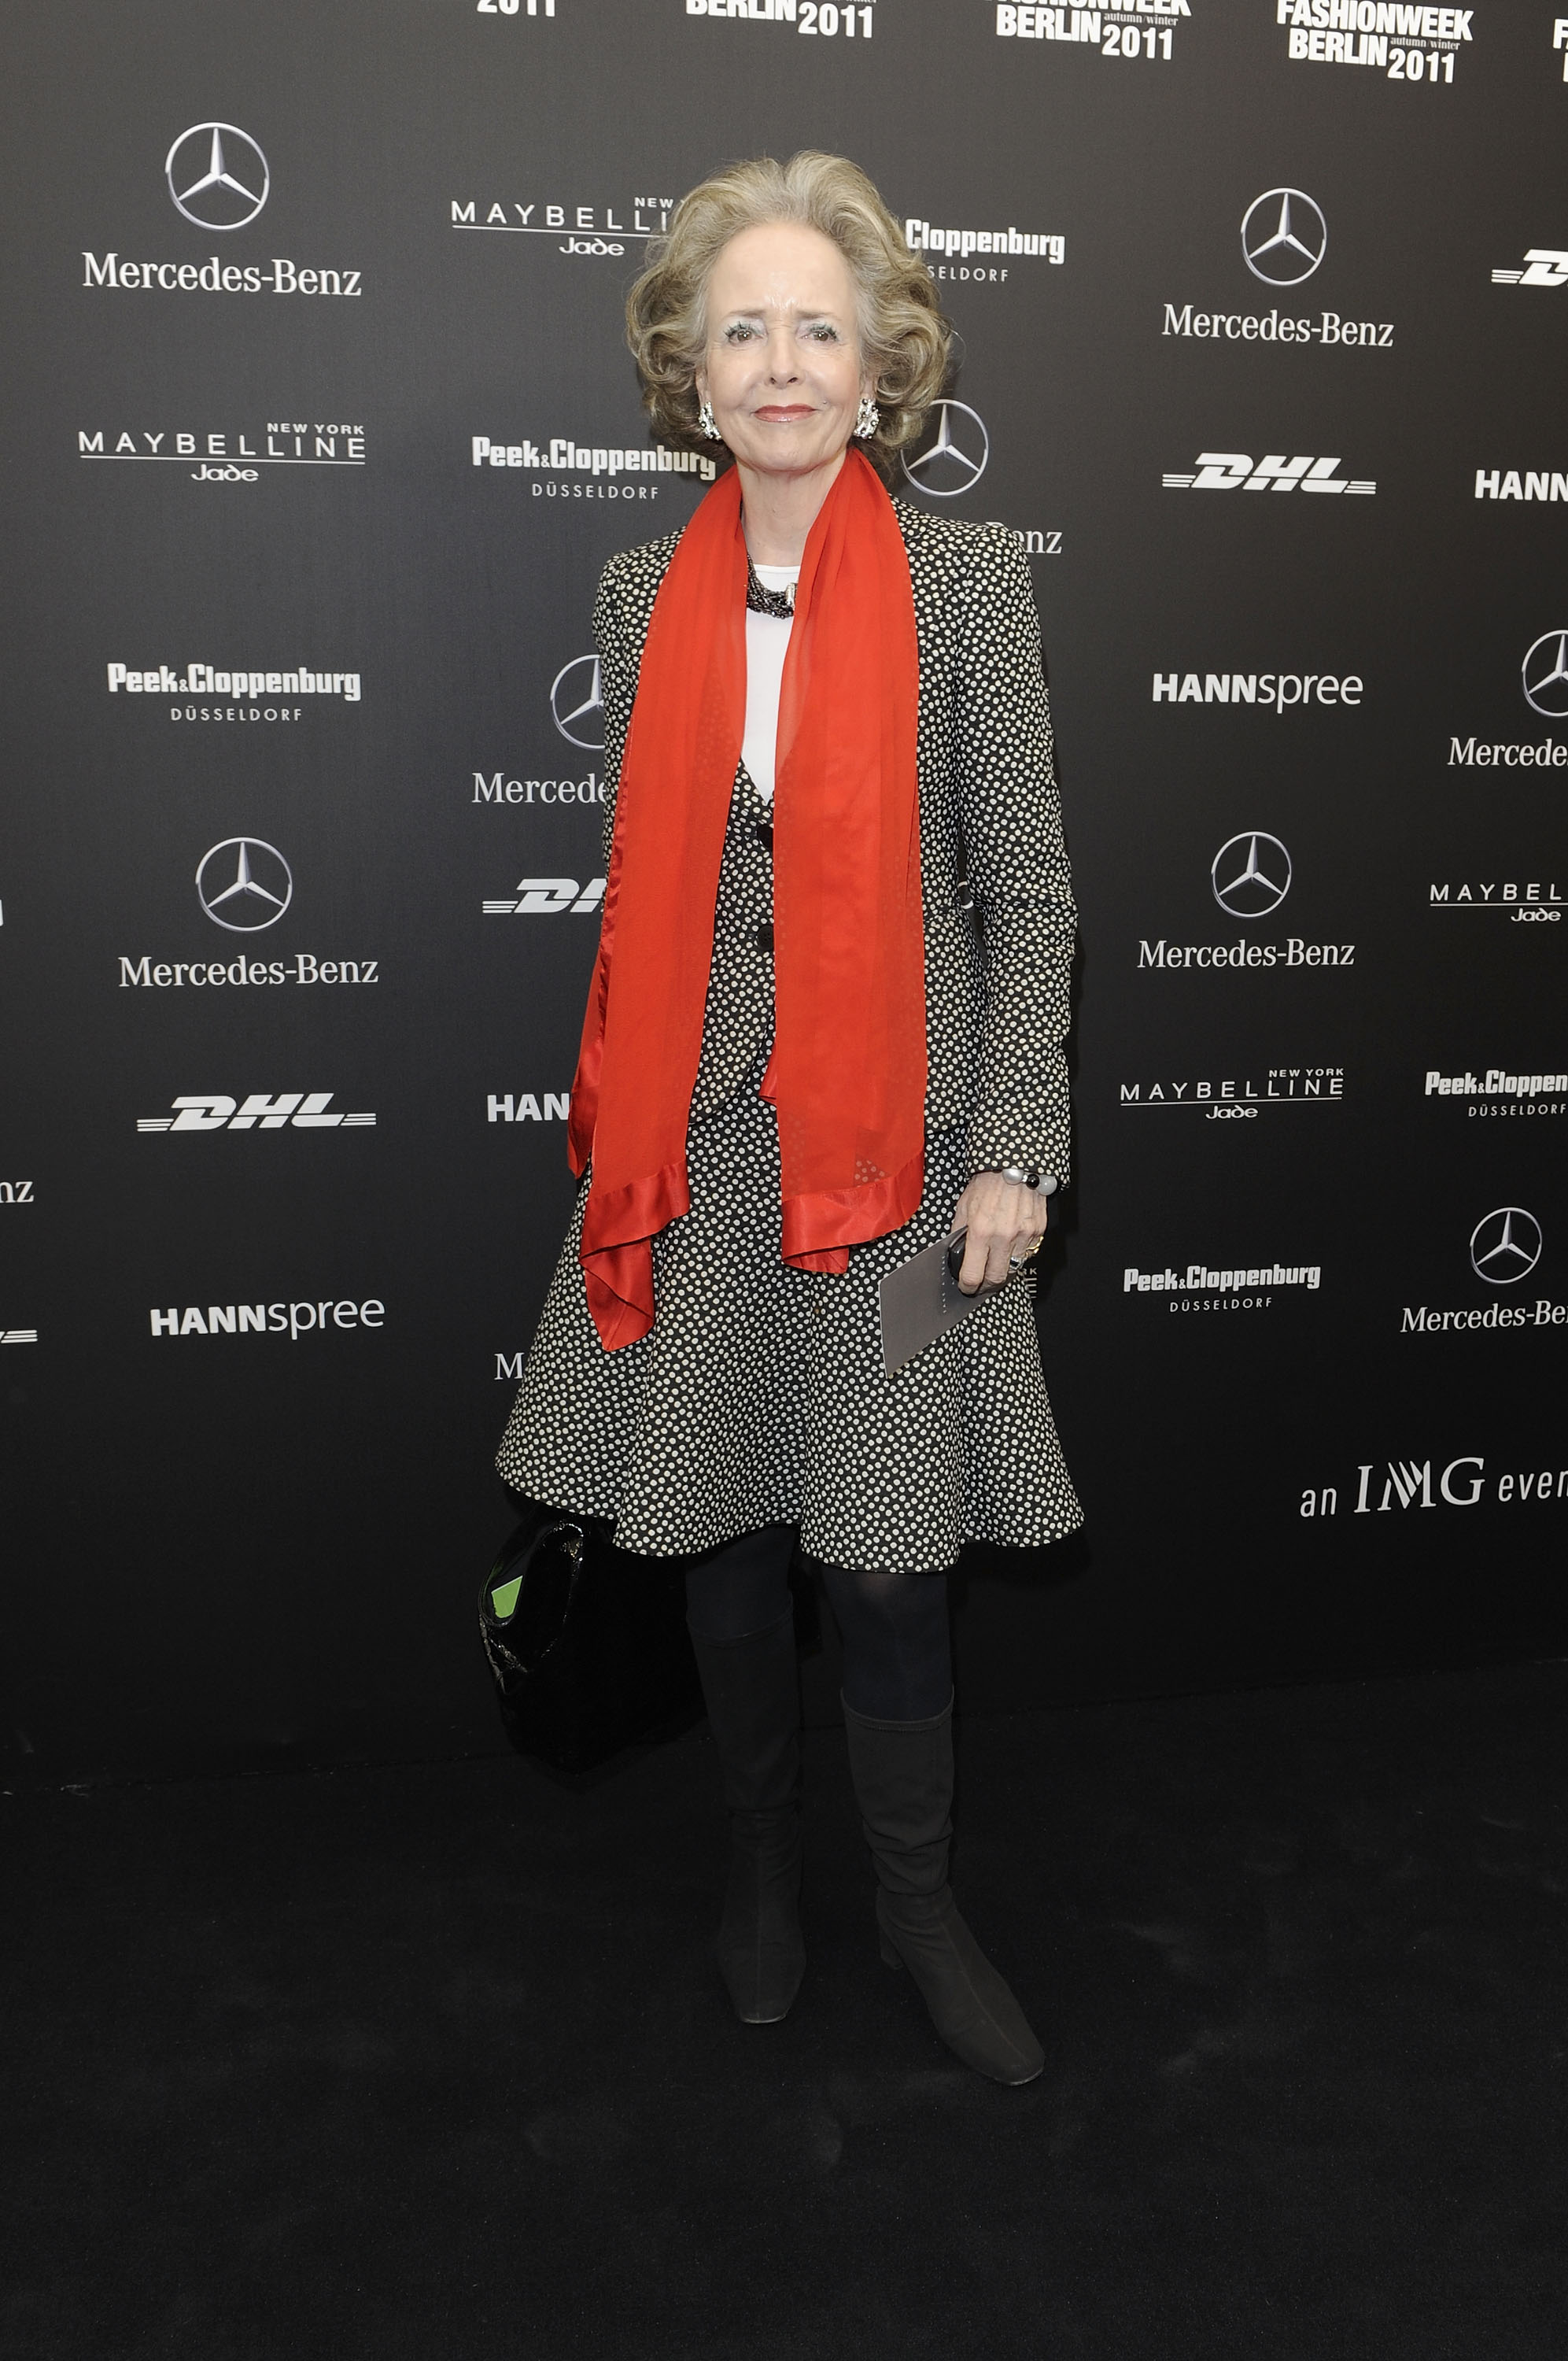 Isa von Hardenberg attends the Laurel Show during the Mercedes Benz Fashion Week at Bebelplatz on January 20, 2011 in Berlin, Germany. | Source: Getty Images